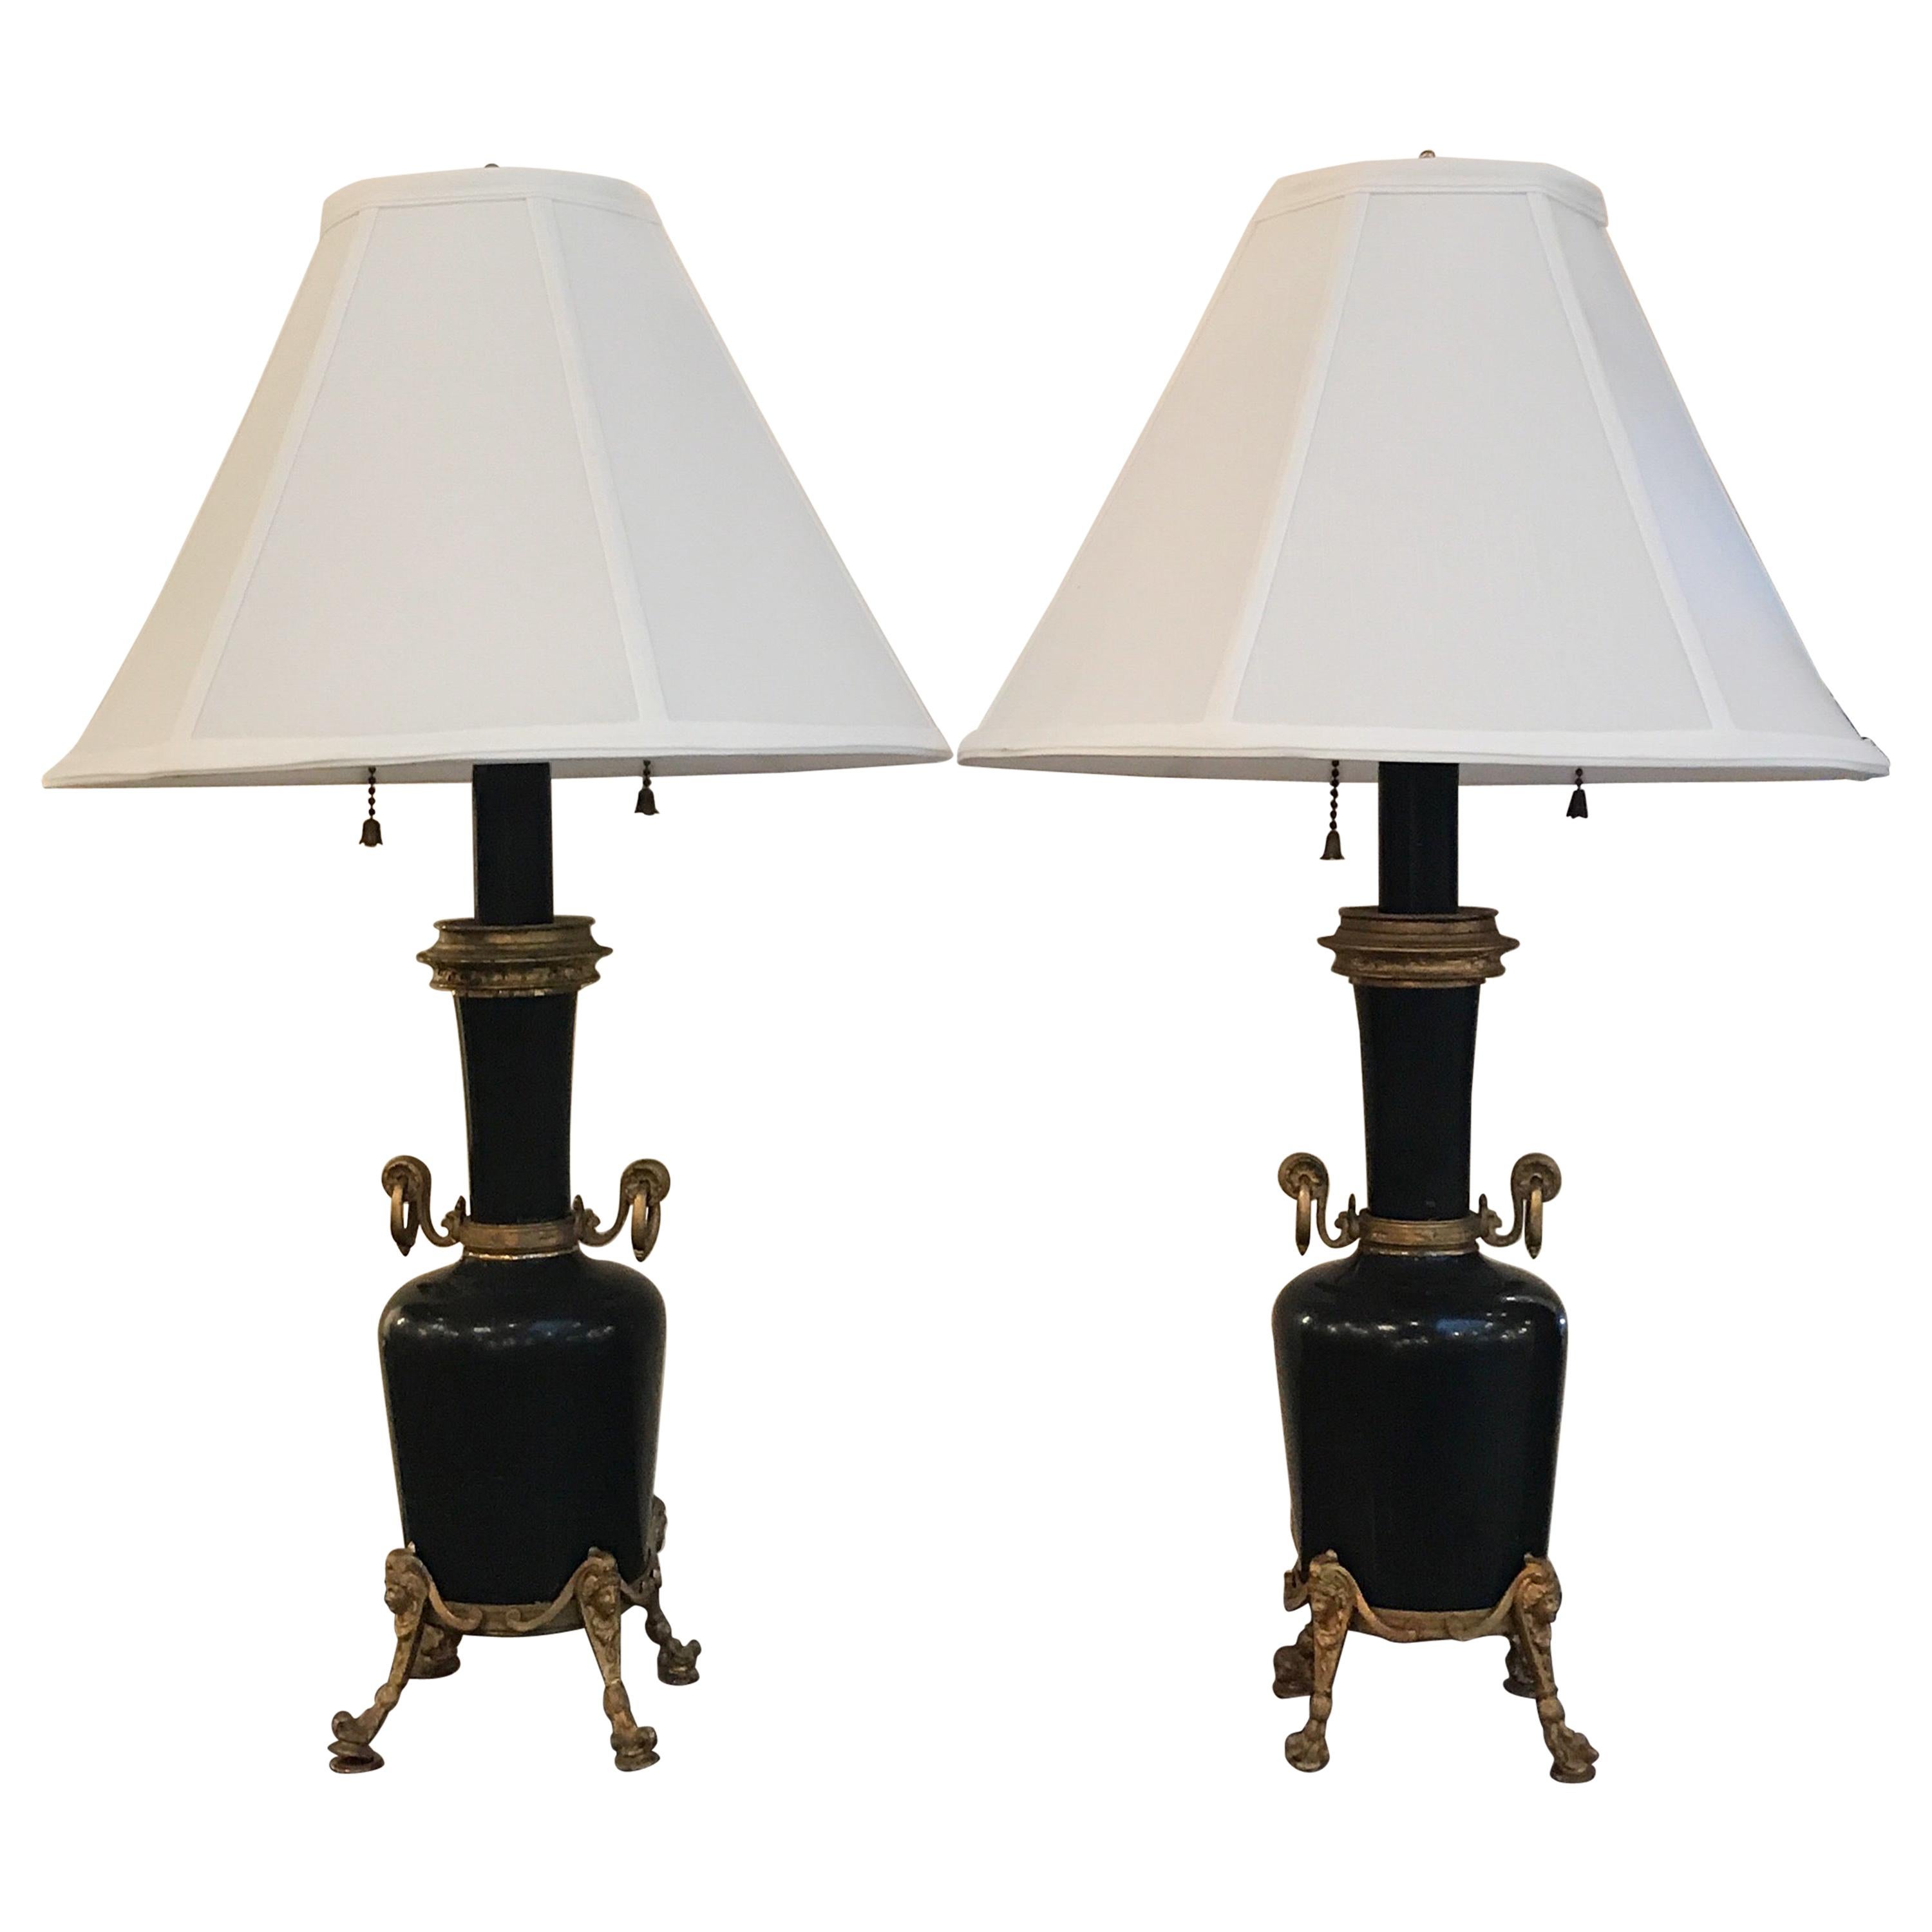 Pair of 19th Century Marble and Ormolu Garnitures Urns Now as Lamps